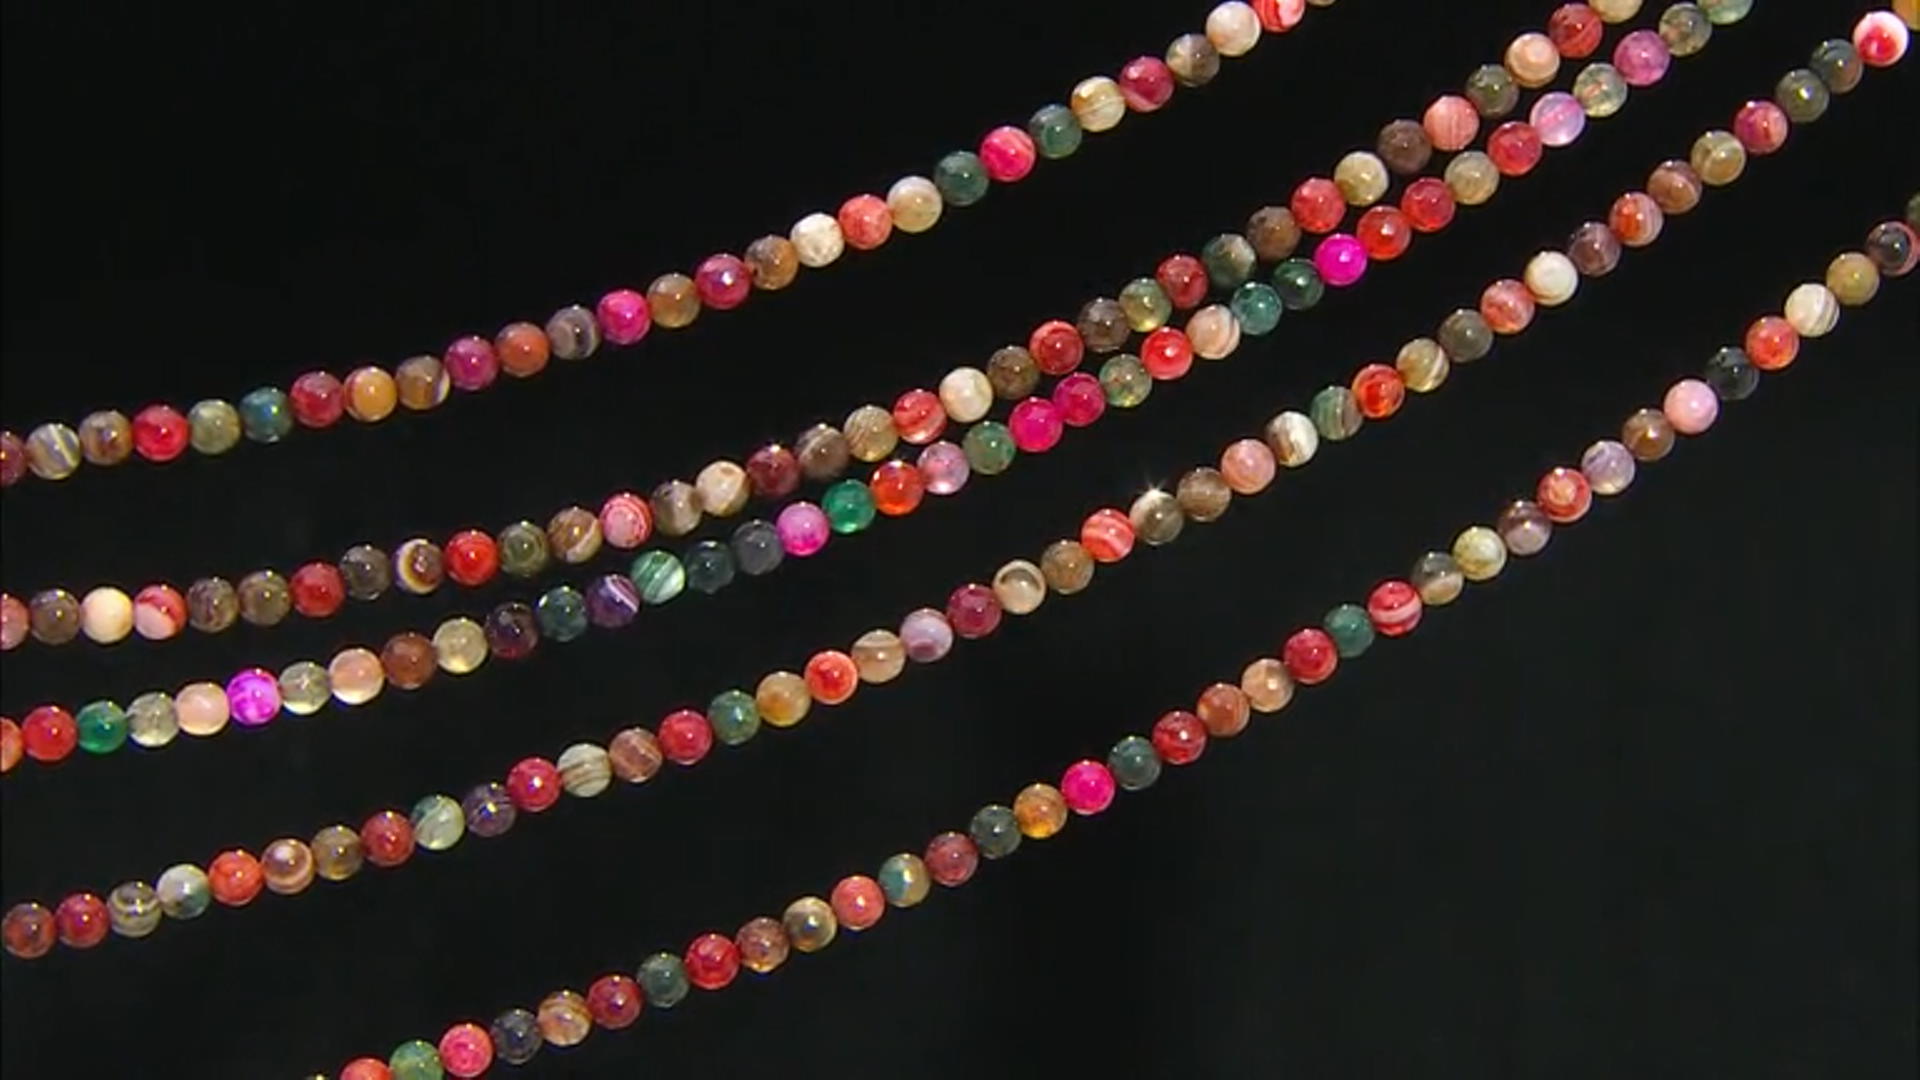 Multi-Color Banded Quench Crackled Agate Faceted appx 6-6.5mm Round Bead Strand Set of 5 appx 14-15" Video Thumbnail